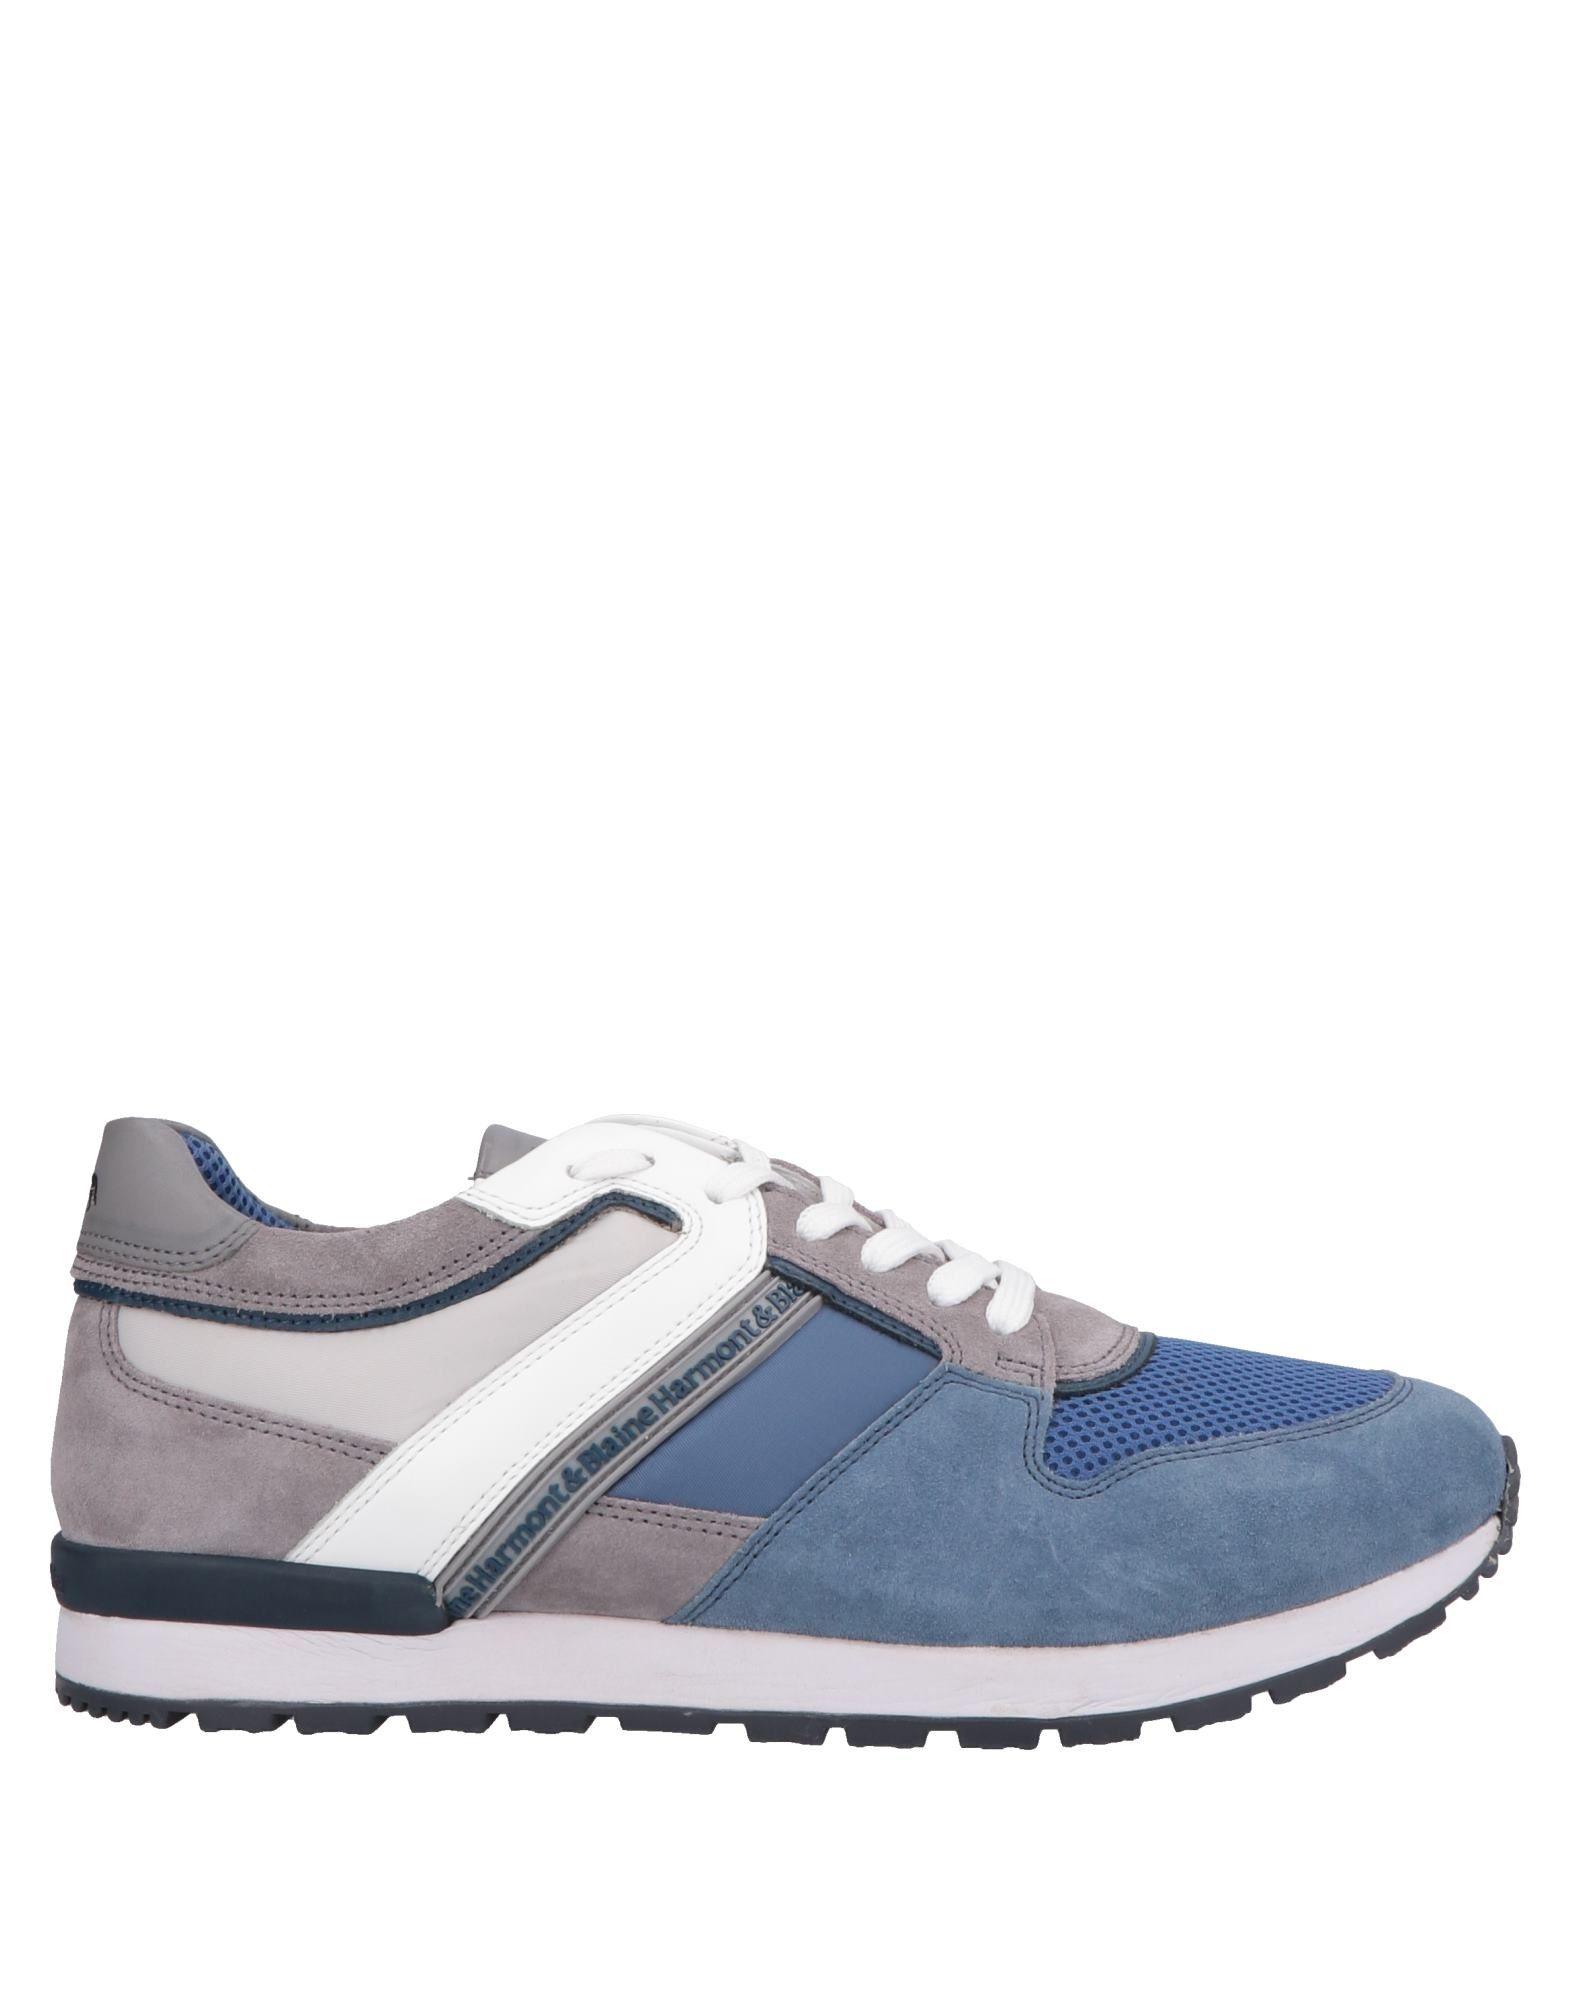 Harmont & Blaine Leather Low-tops & Sneakers in Slate Blue (Blue) for ...